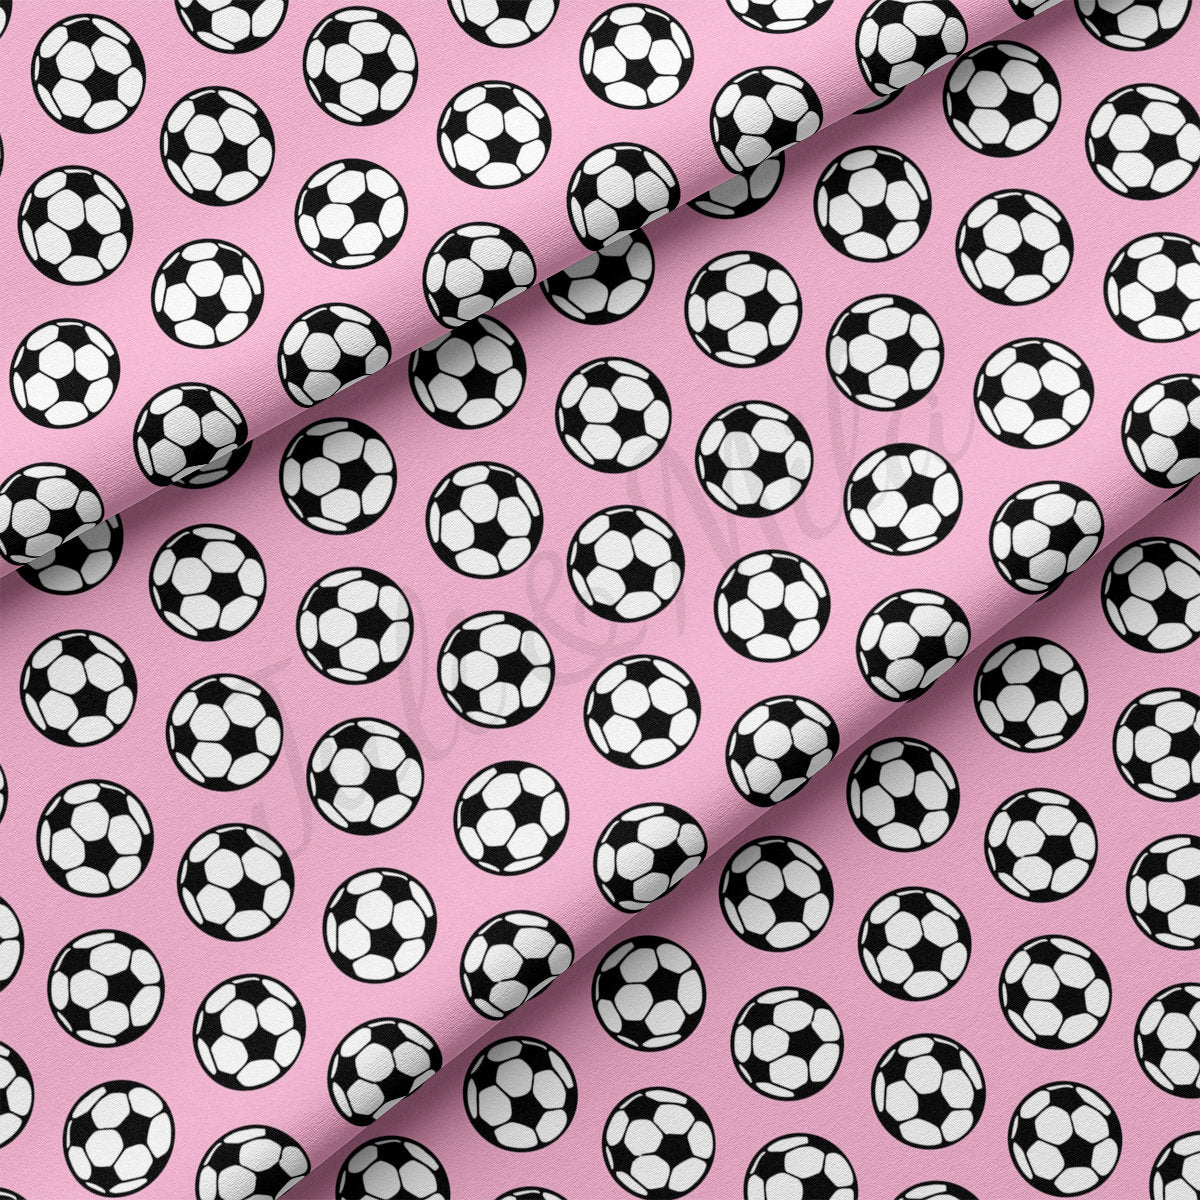 DBP Fabric Double Brushed Polyester DBP2465 Soccer